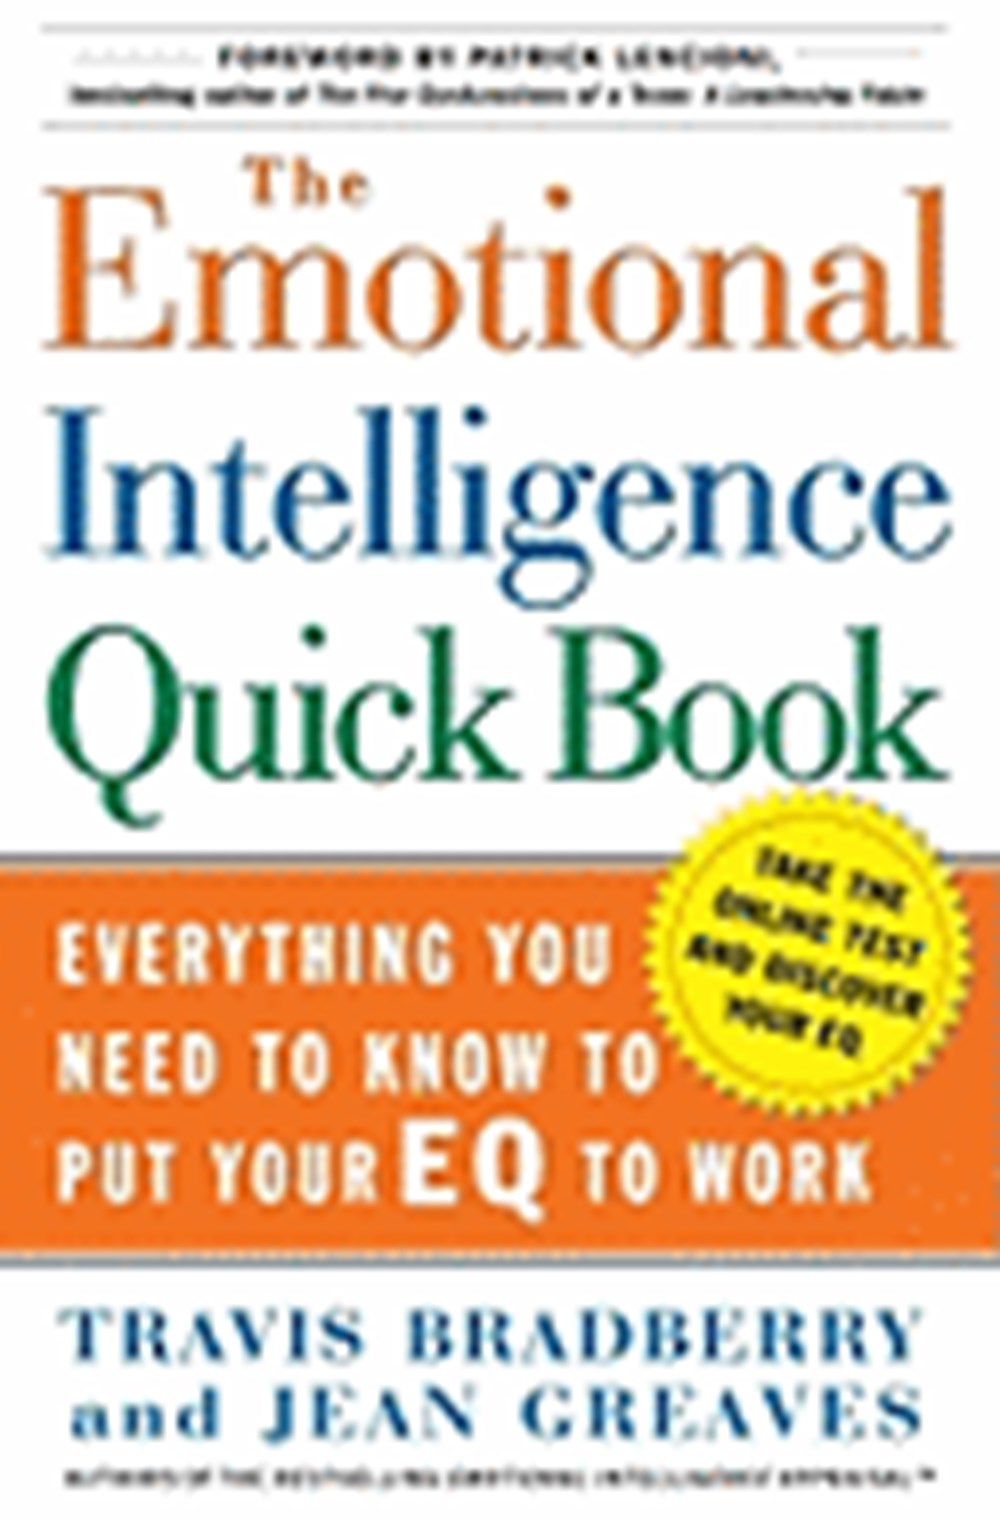 Emotional Intelligence Quick Book Everything You Need to Know to Put Your Eq to Work